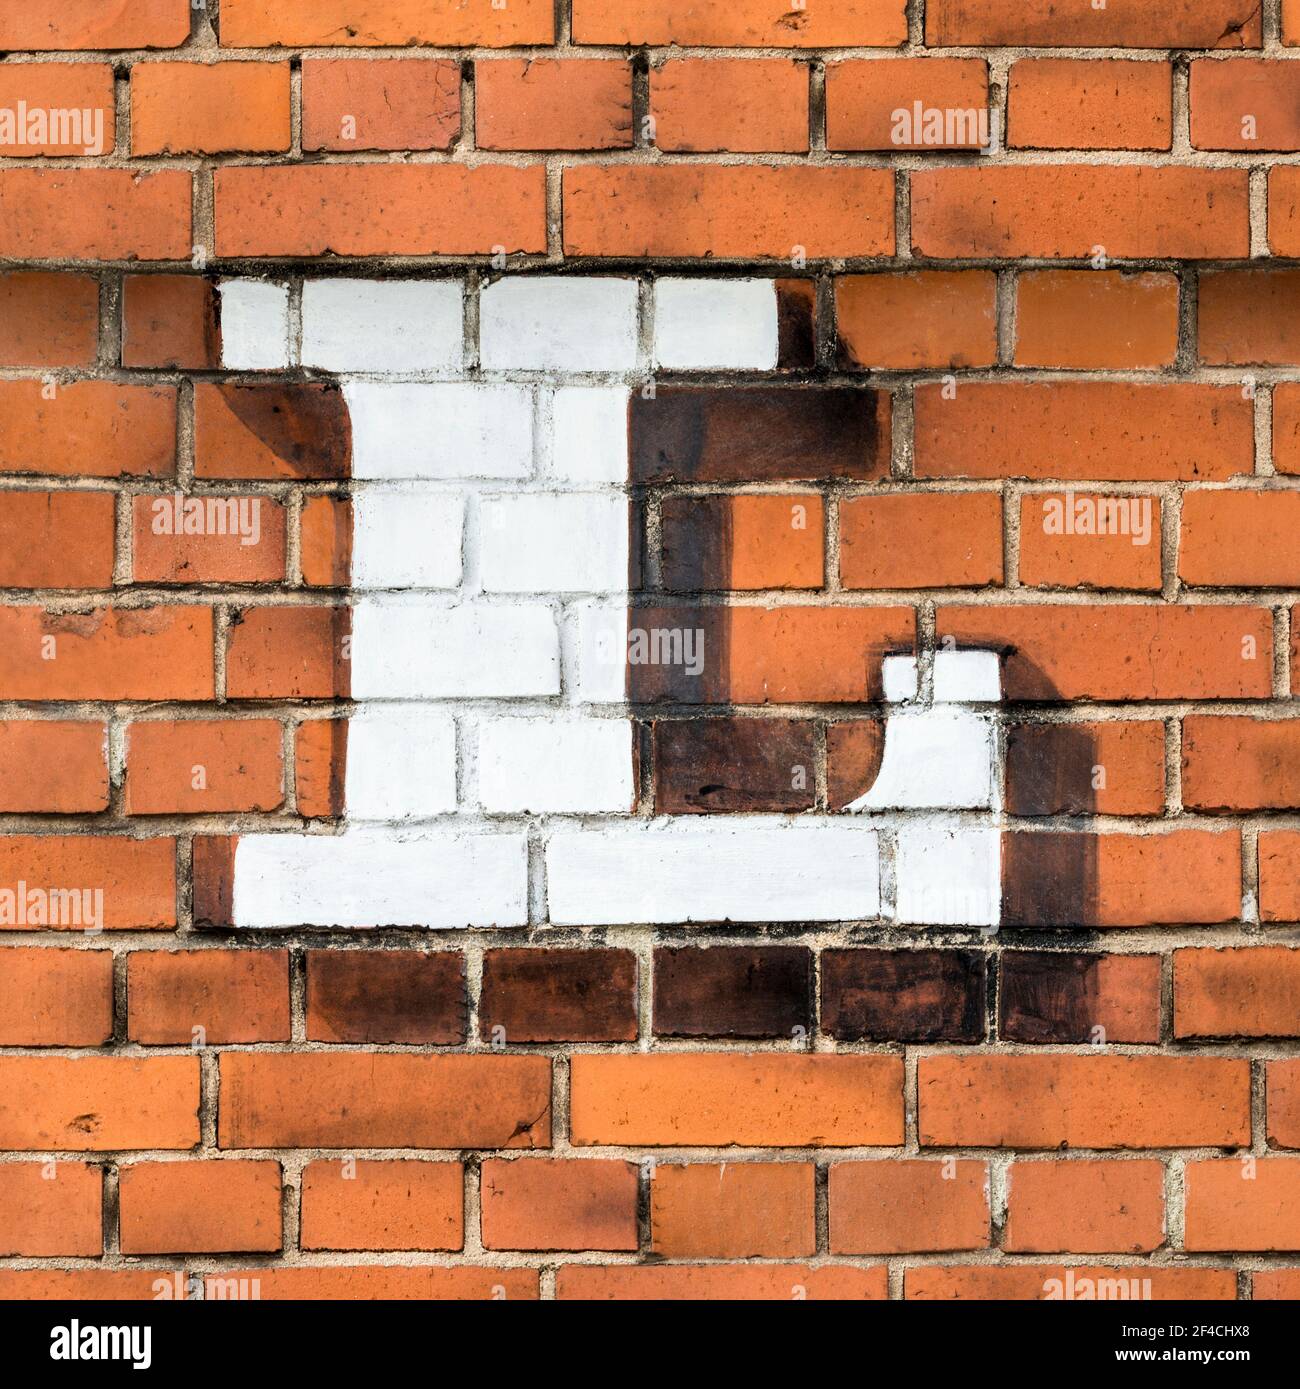 A white capital letter L painted on a red brick wall Stock Photo